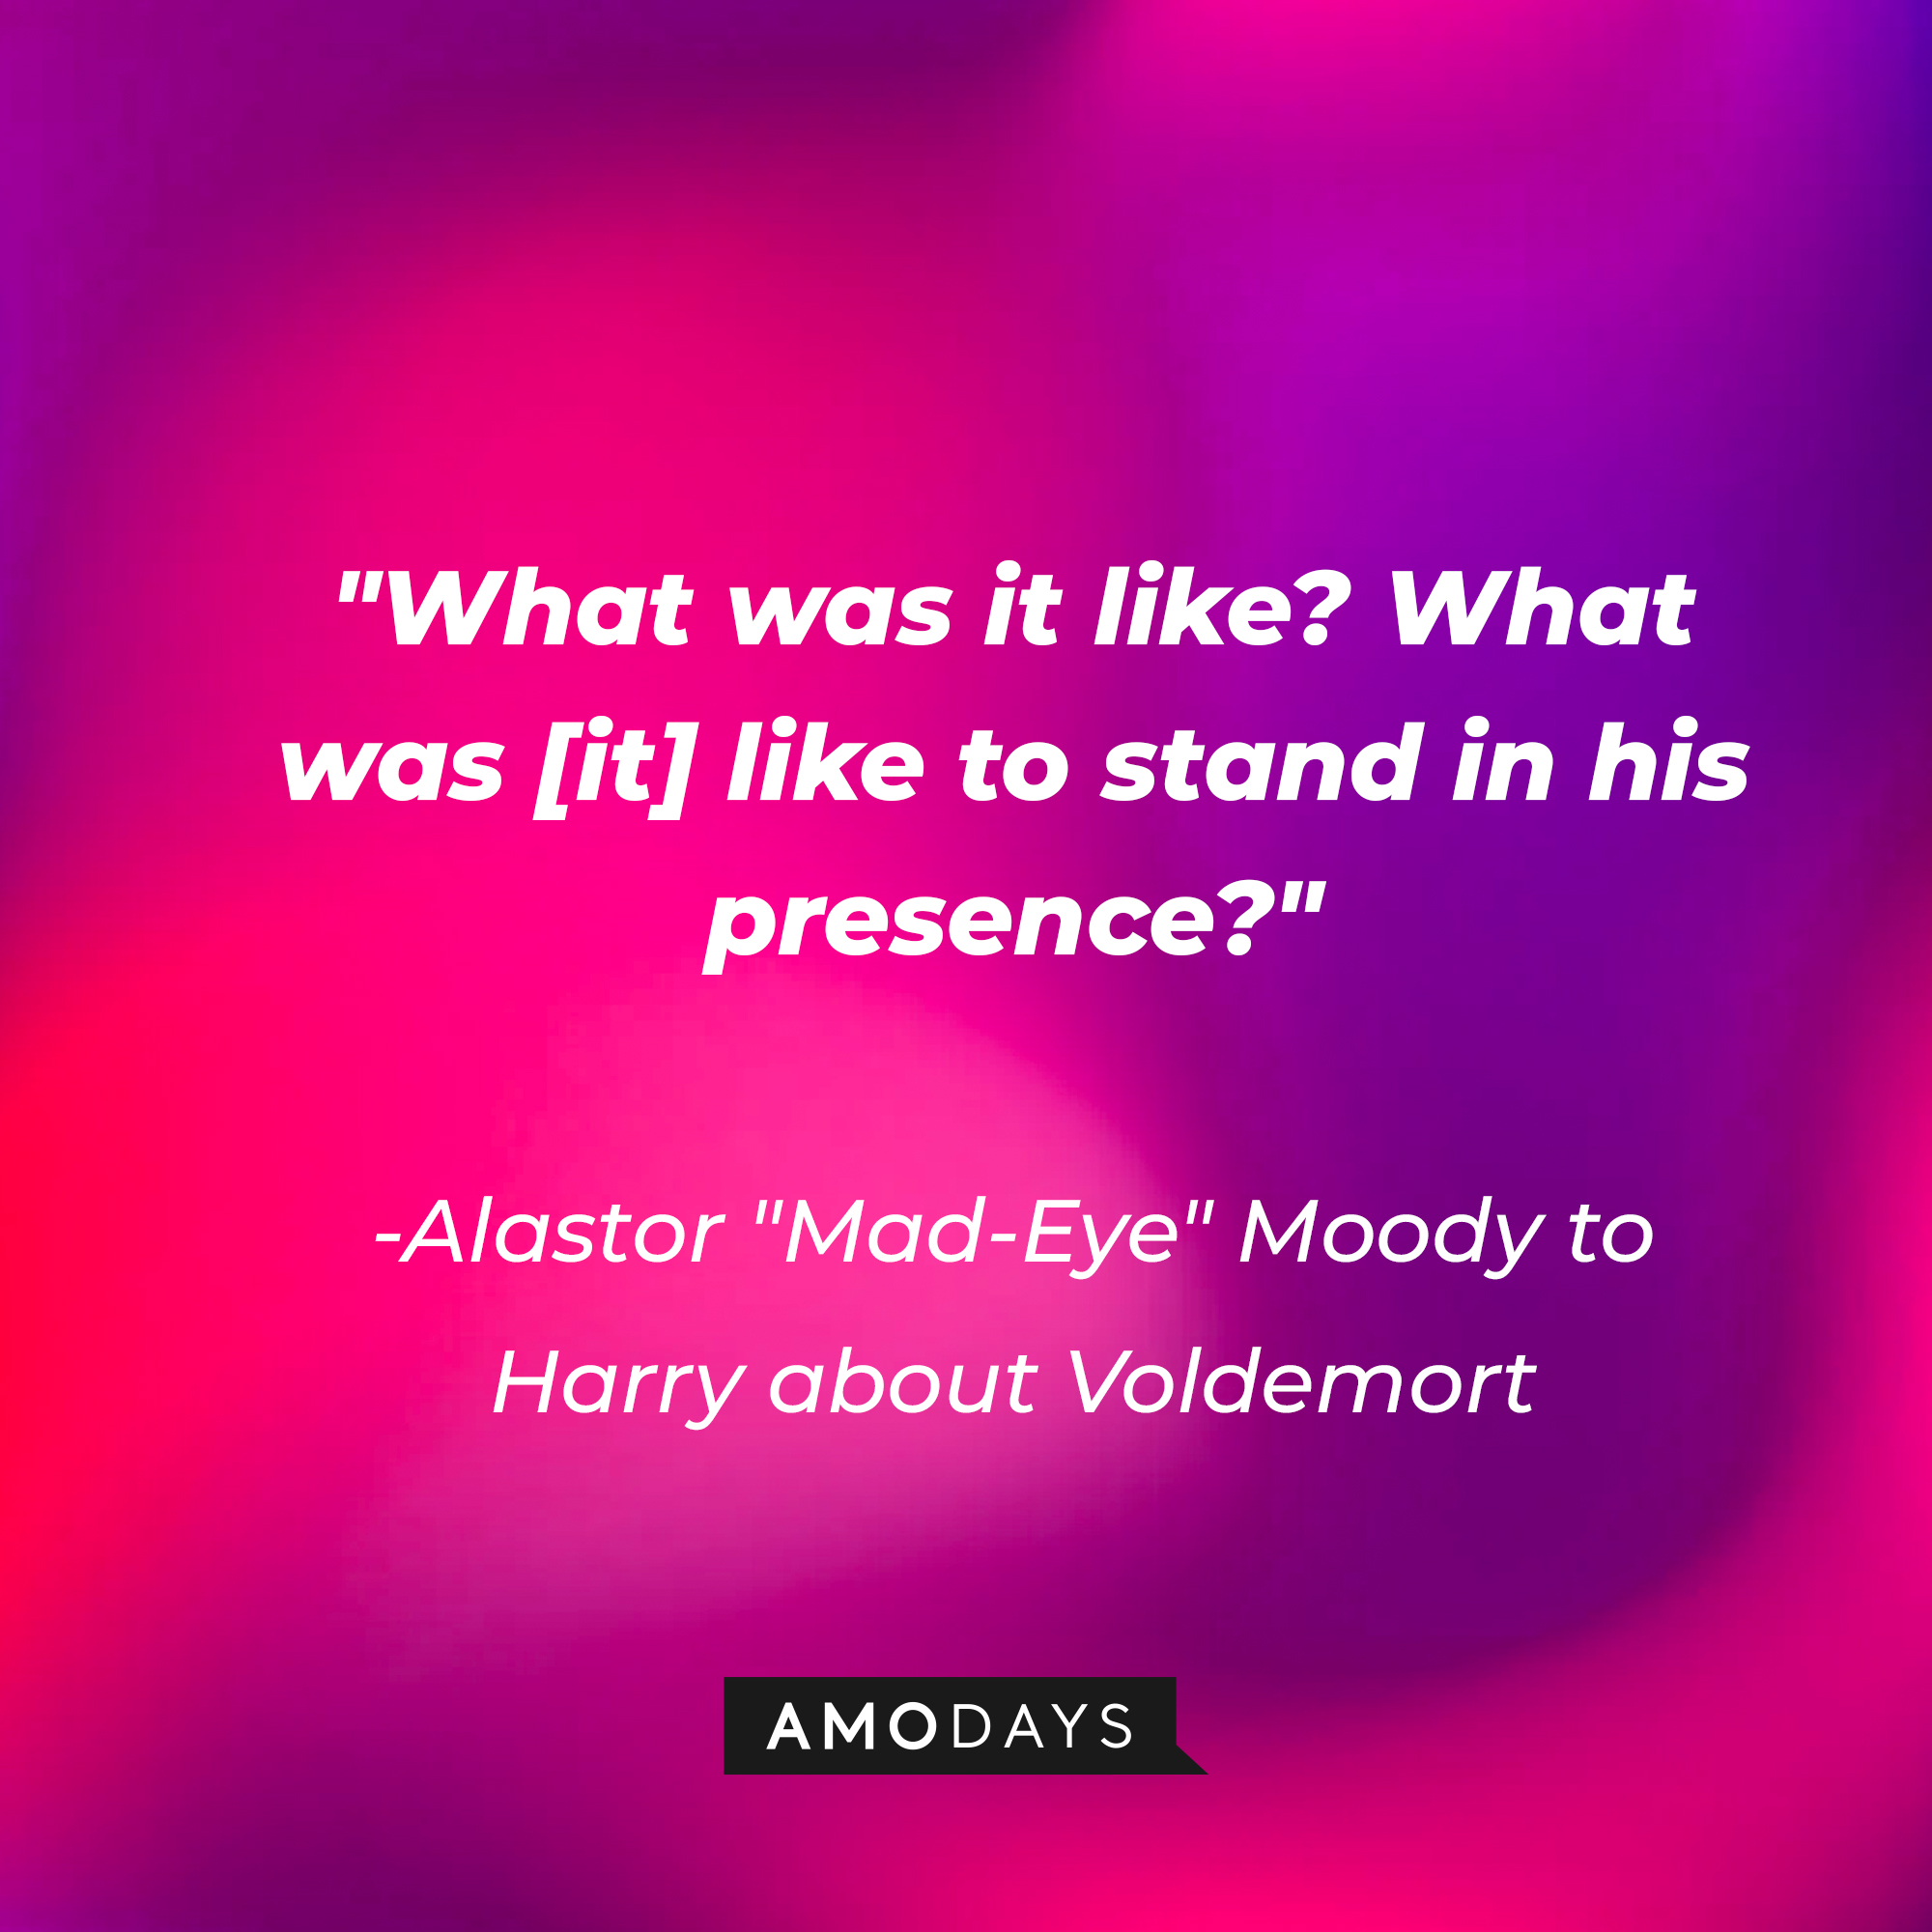 Alastor "Mad-Eye" Moody's quote: [to Harry, about Voldemort] "What was it like? What was [it] like to stand in his presence?" | Image: Amodays